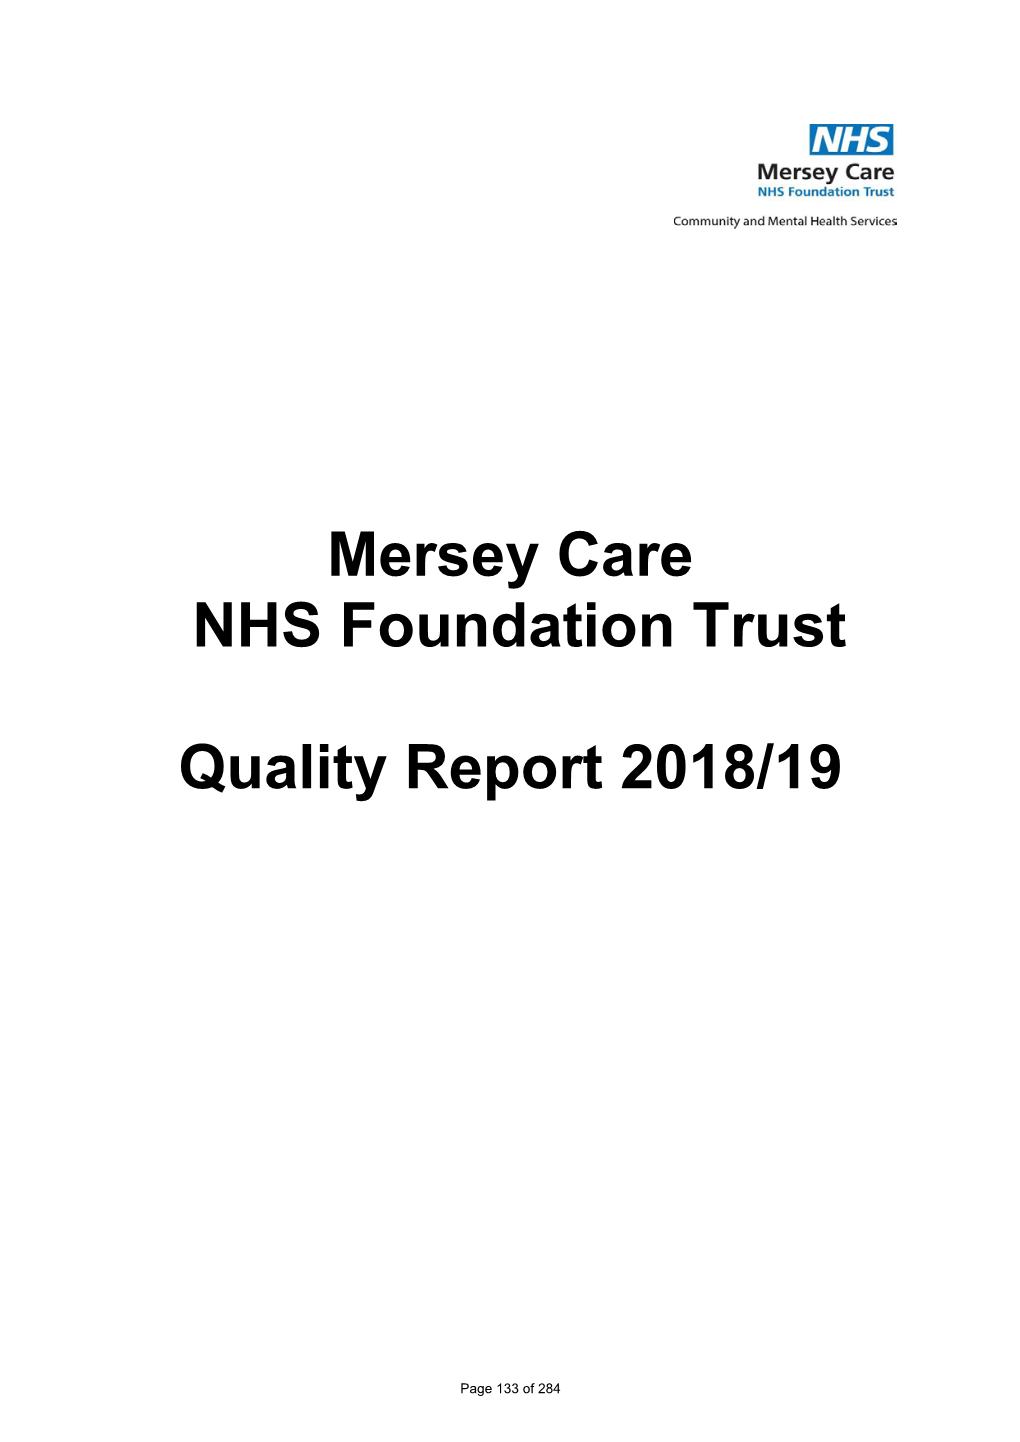 Mersey Care NHS Foundation Trust Quality Report 2018/19